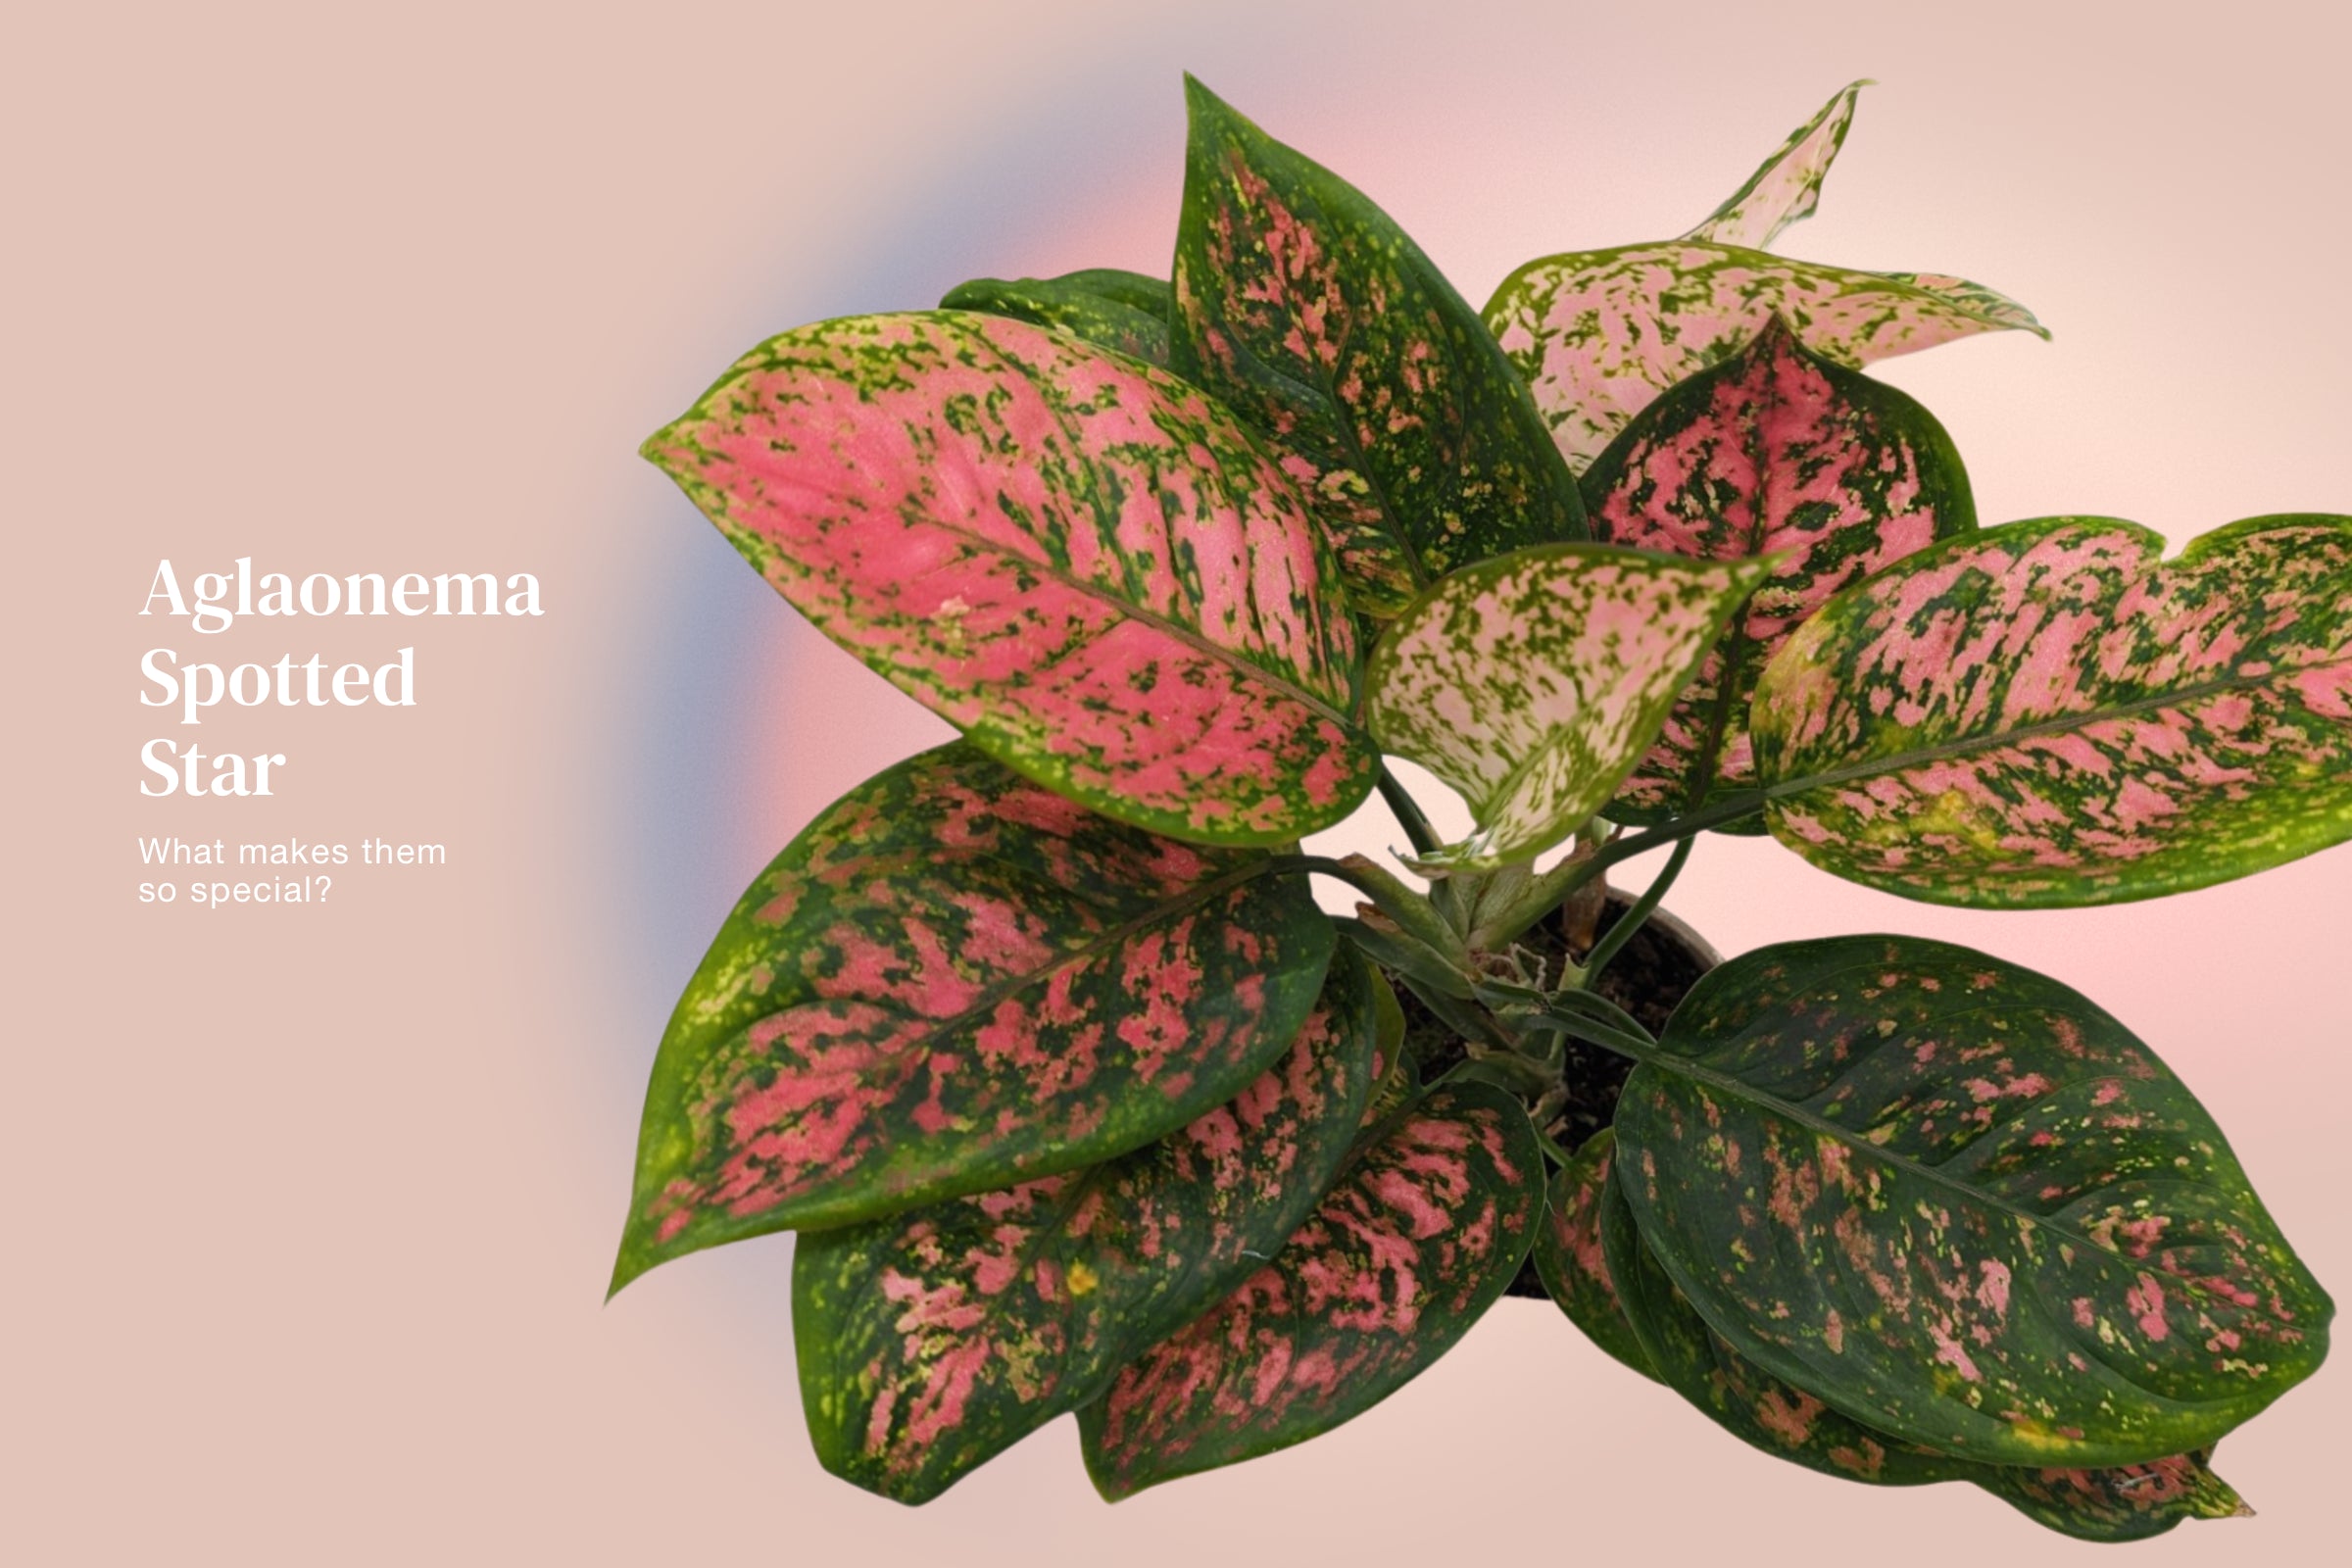 What makes the Aglaonema Spotted Star so special?